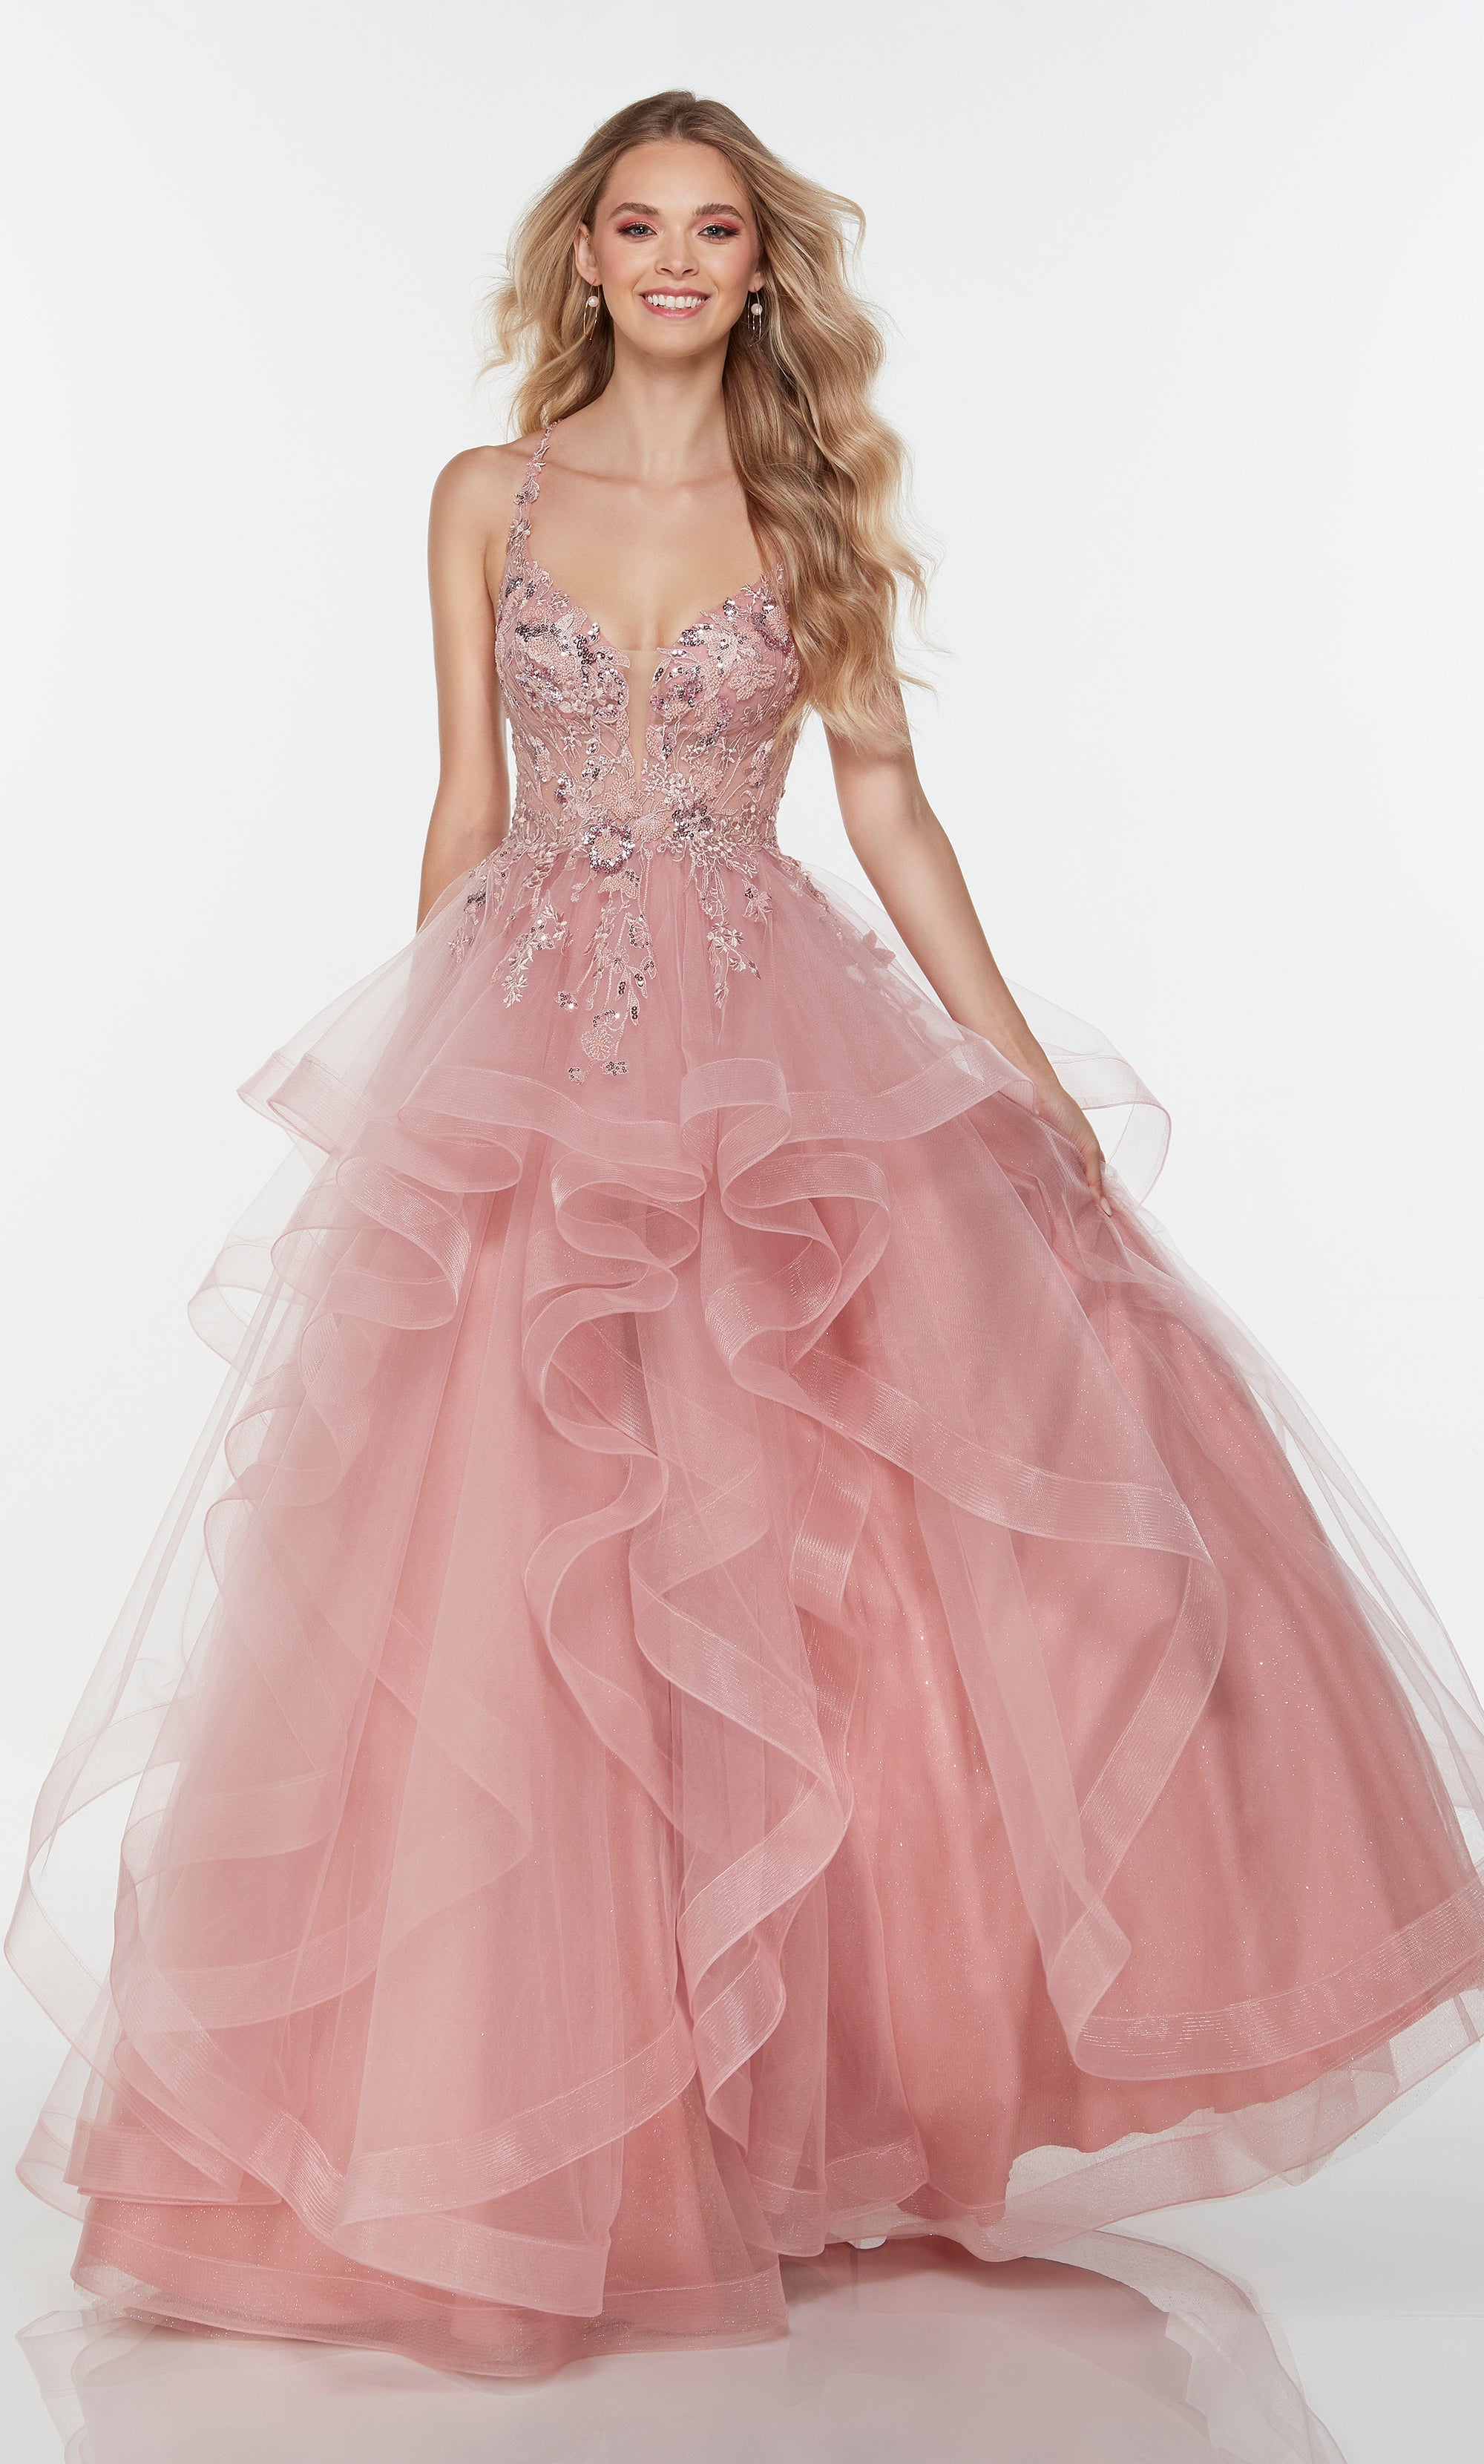 Hot Pink Long Tulle Prom Dress With Corset Bodice And Lace